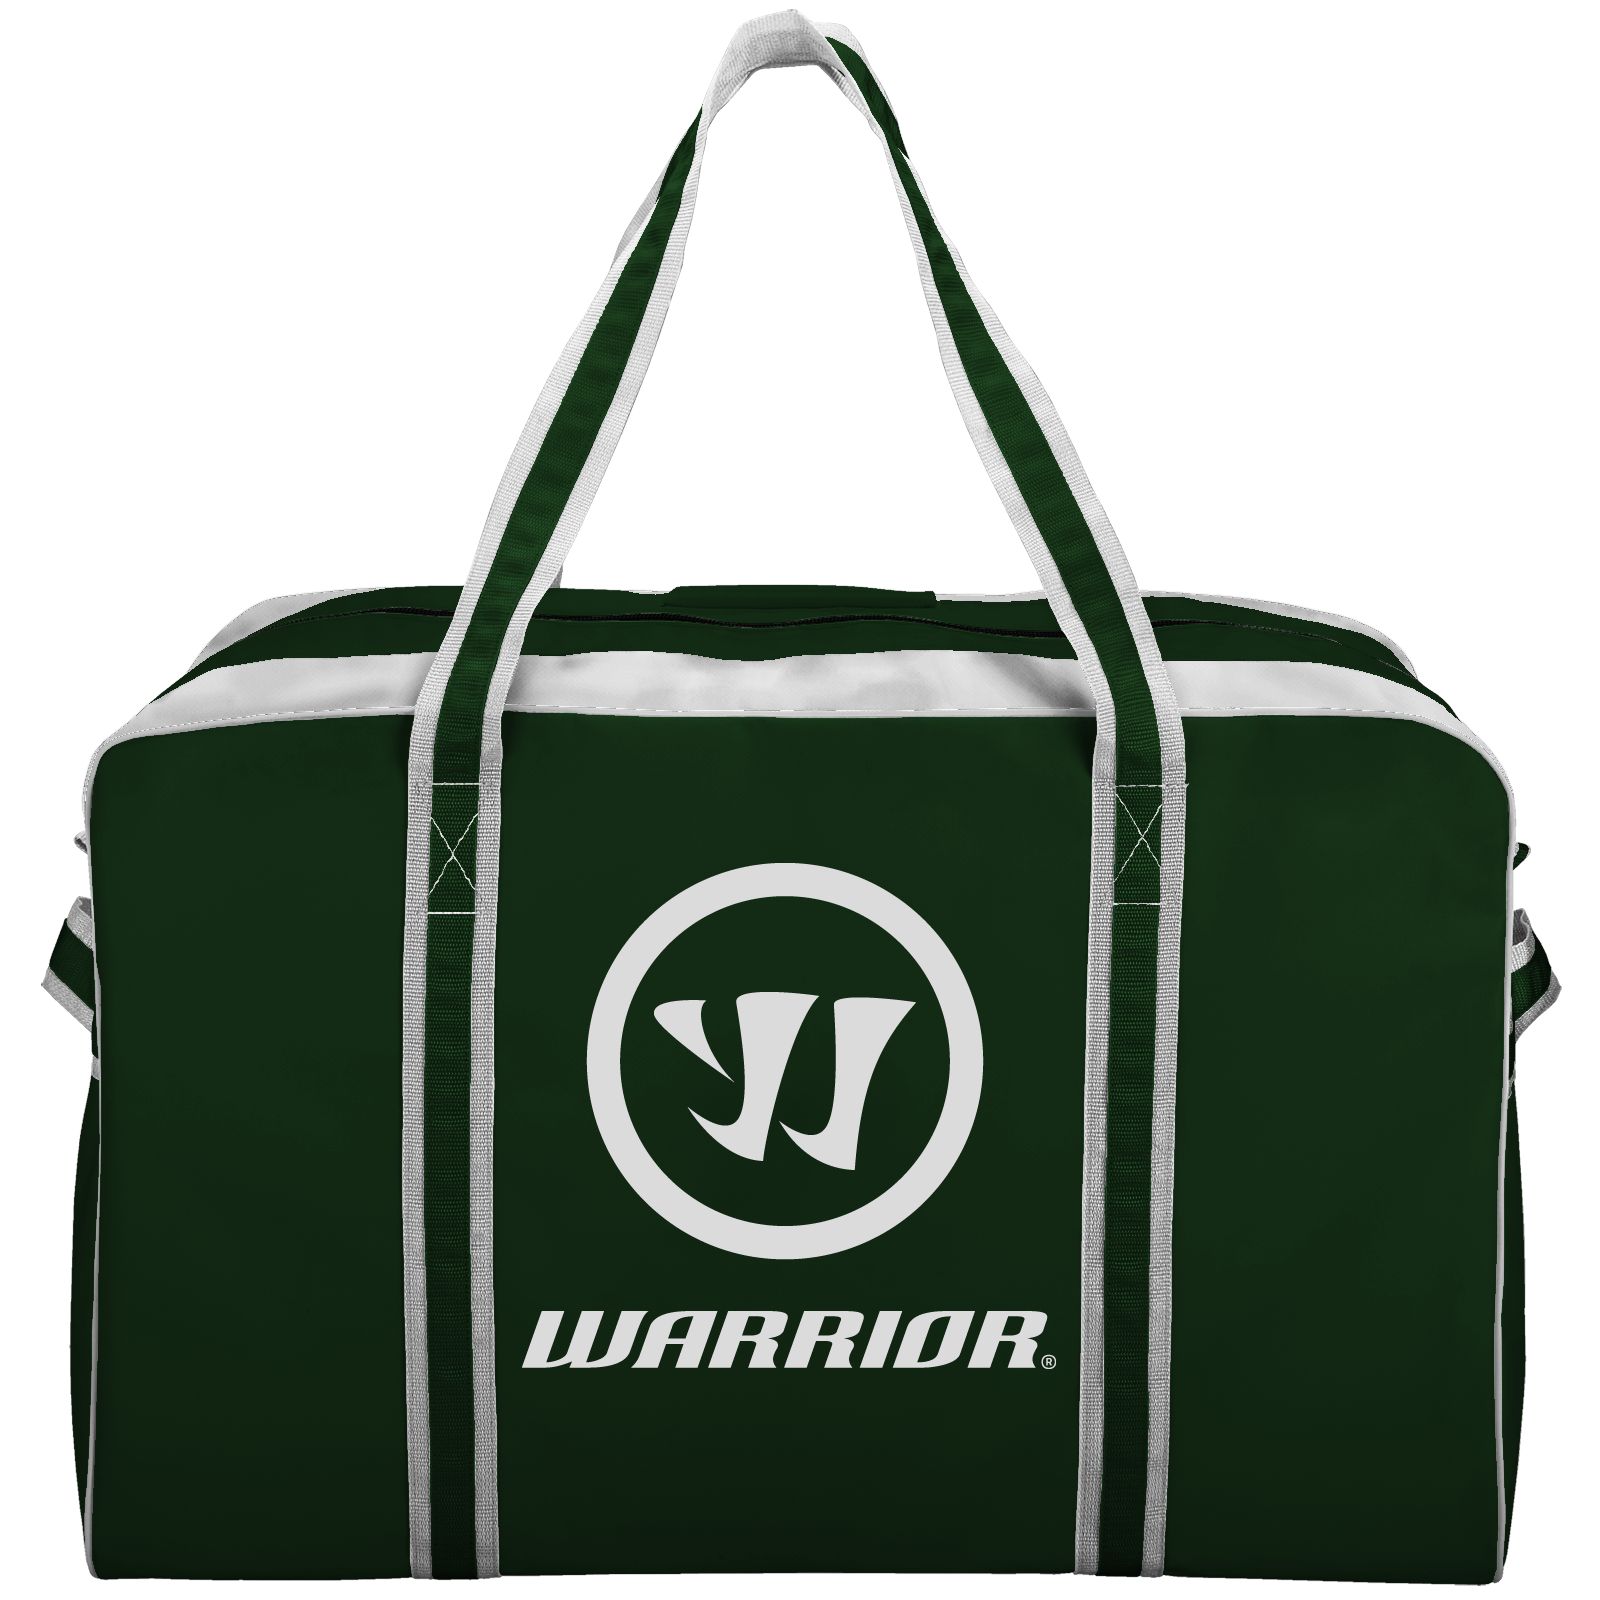 Warrior Pro Bag, Forest Green with White image number 0